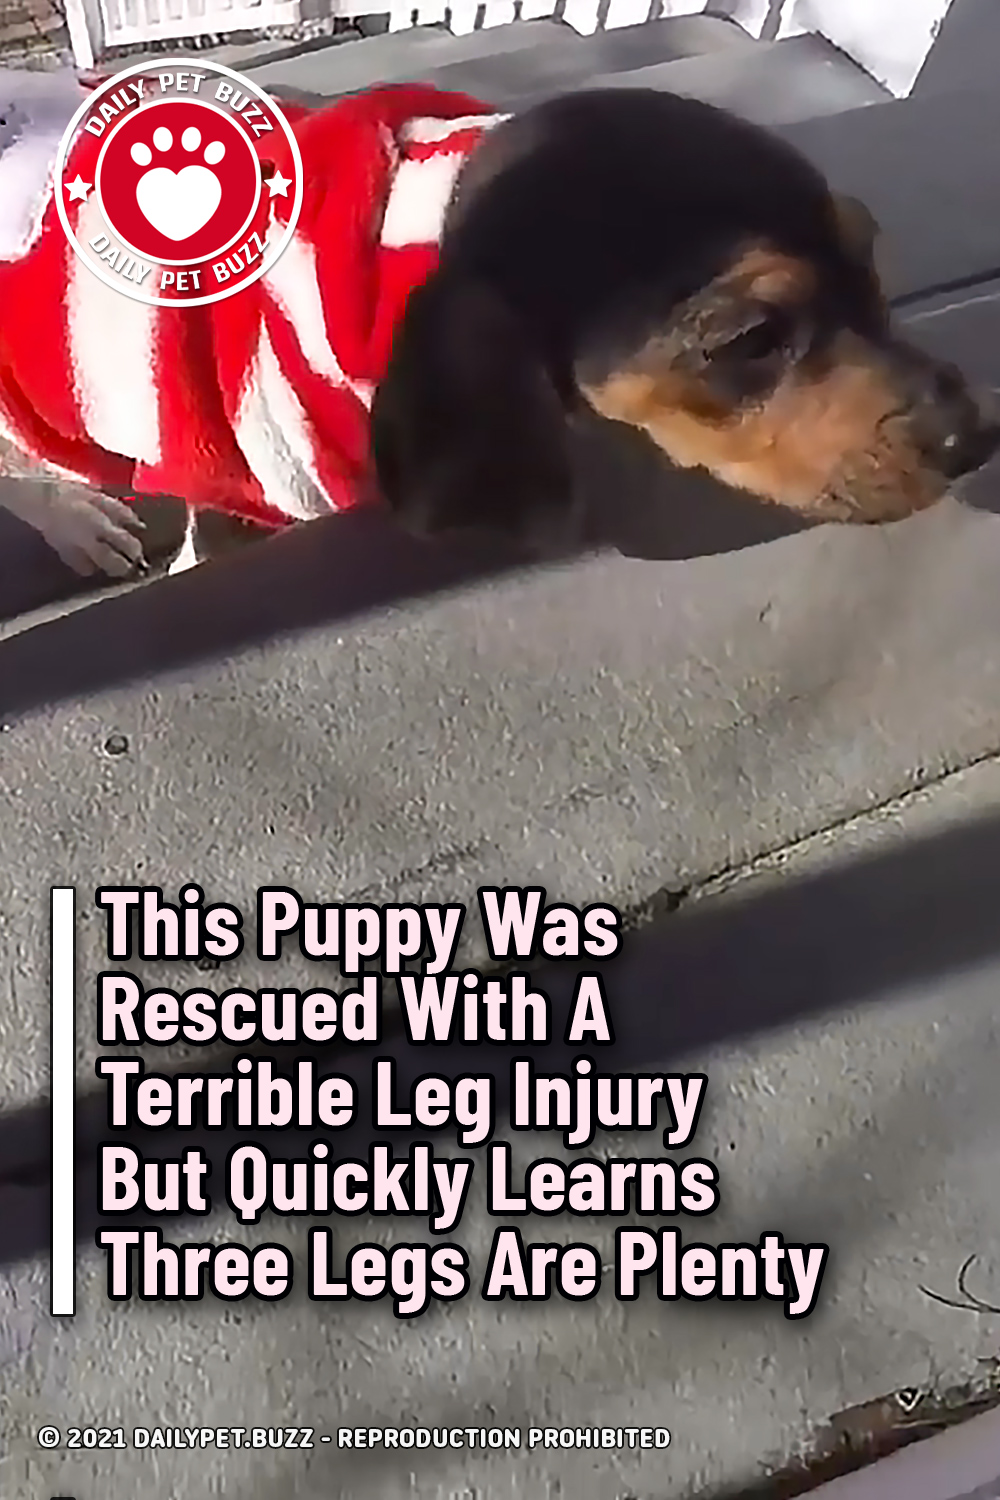 This Puppy Was Rescued With A Terrible Leg Injury But Quickly Learns Three Legs Are Plenty